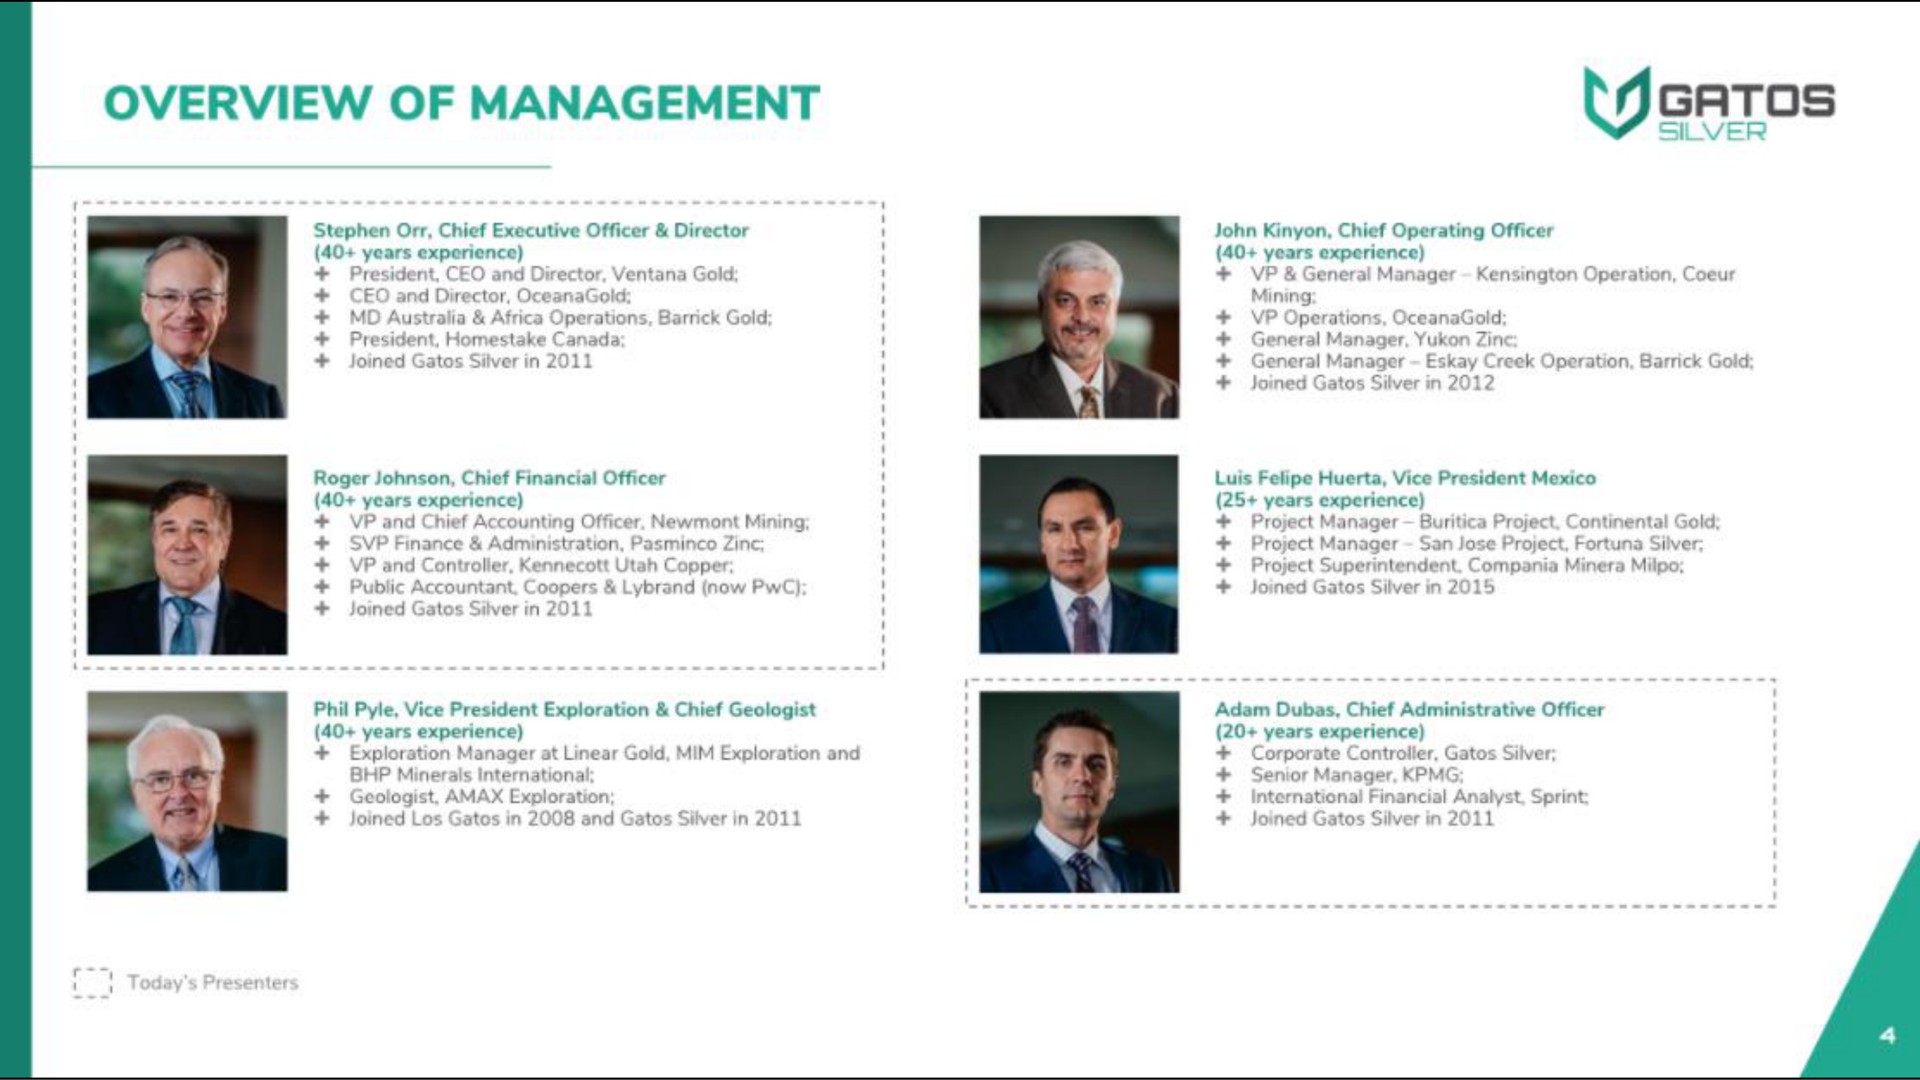 overview of management | Gatos Silver